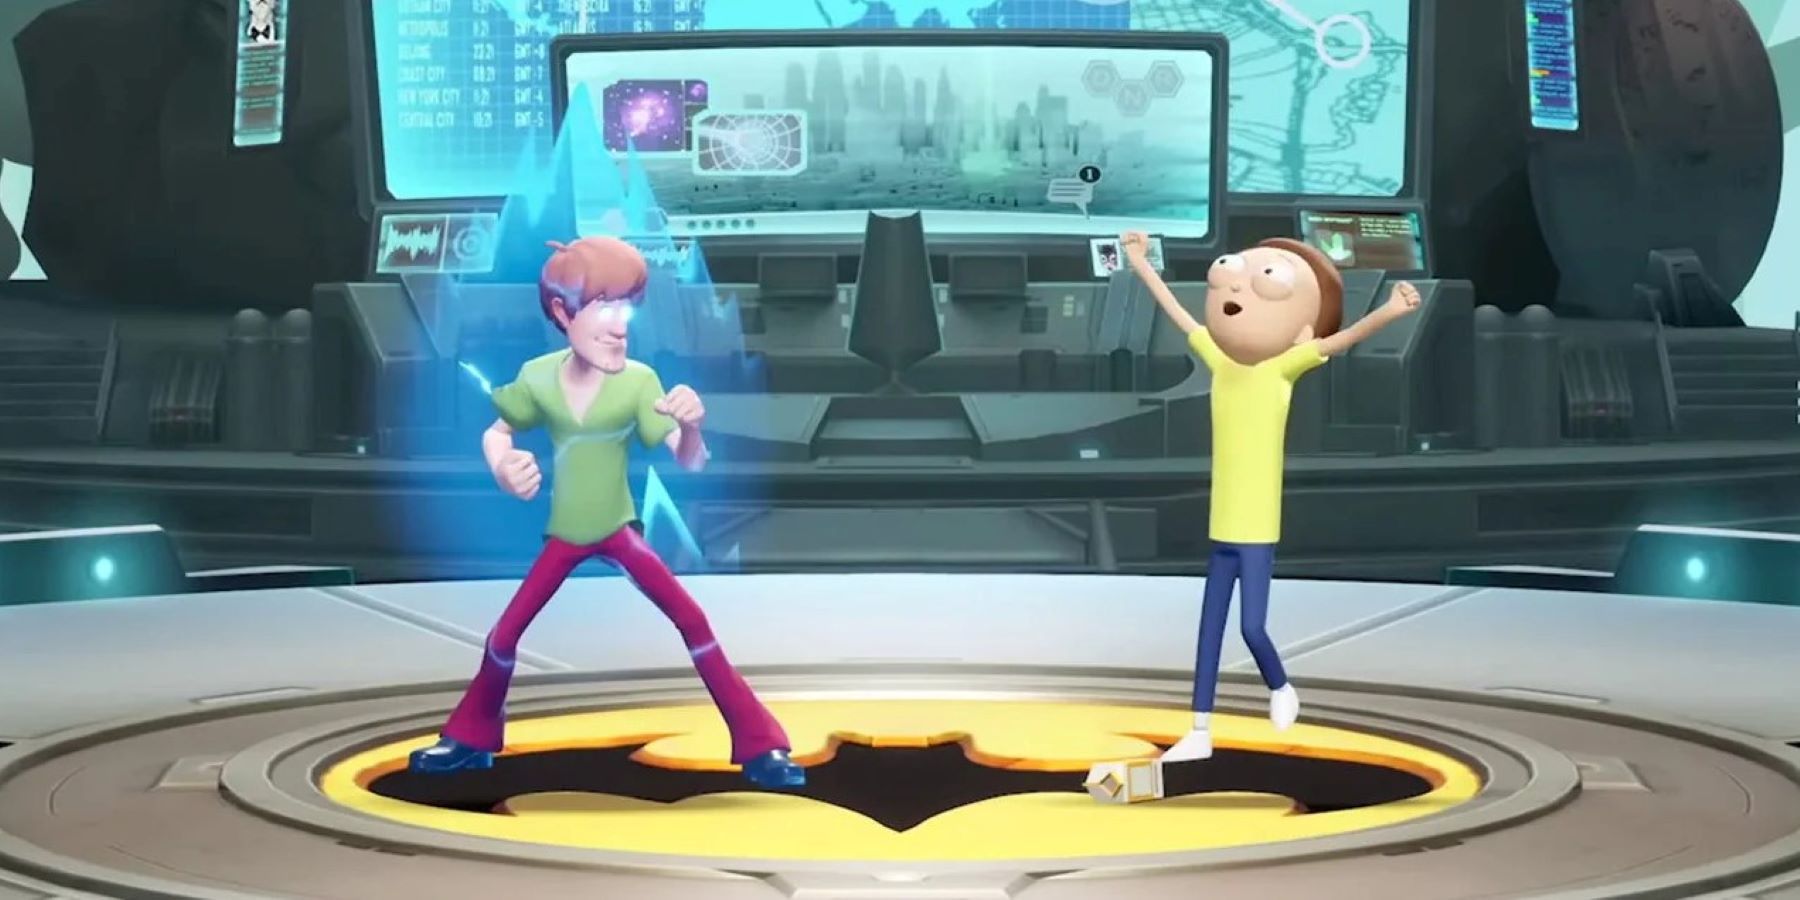 Shaggy Rogers and Morty Smith on the MultiVersus Batcave stage